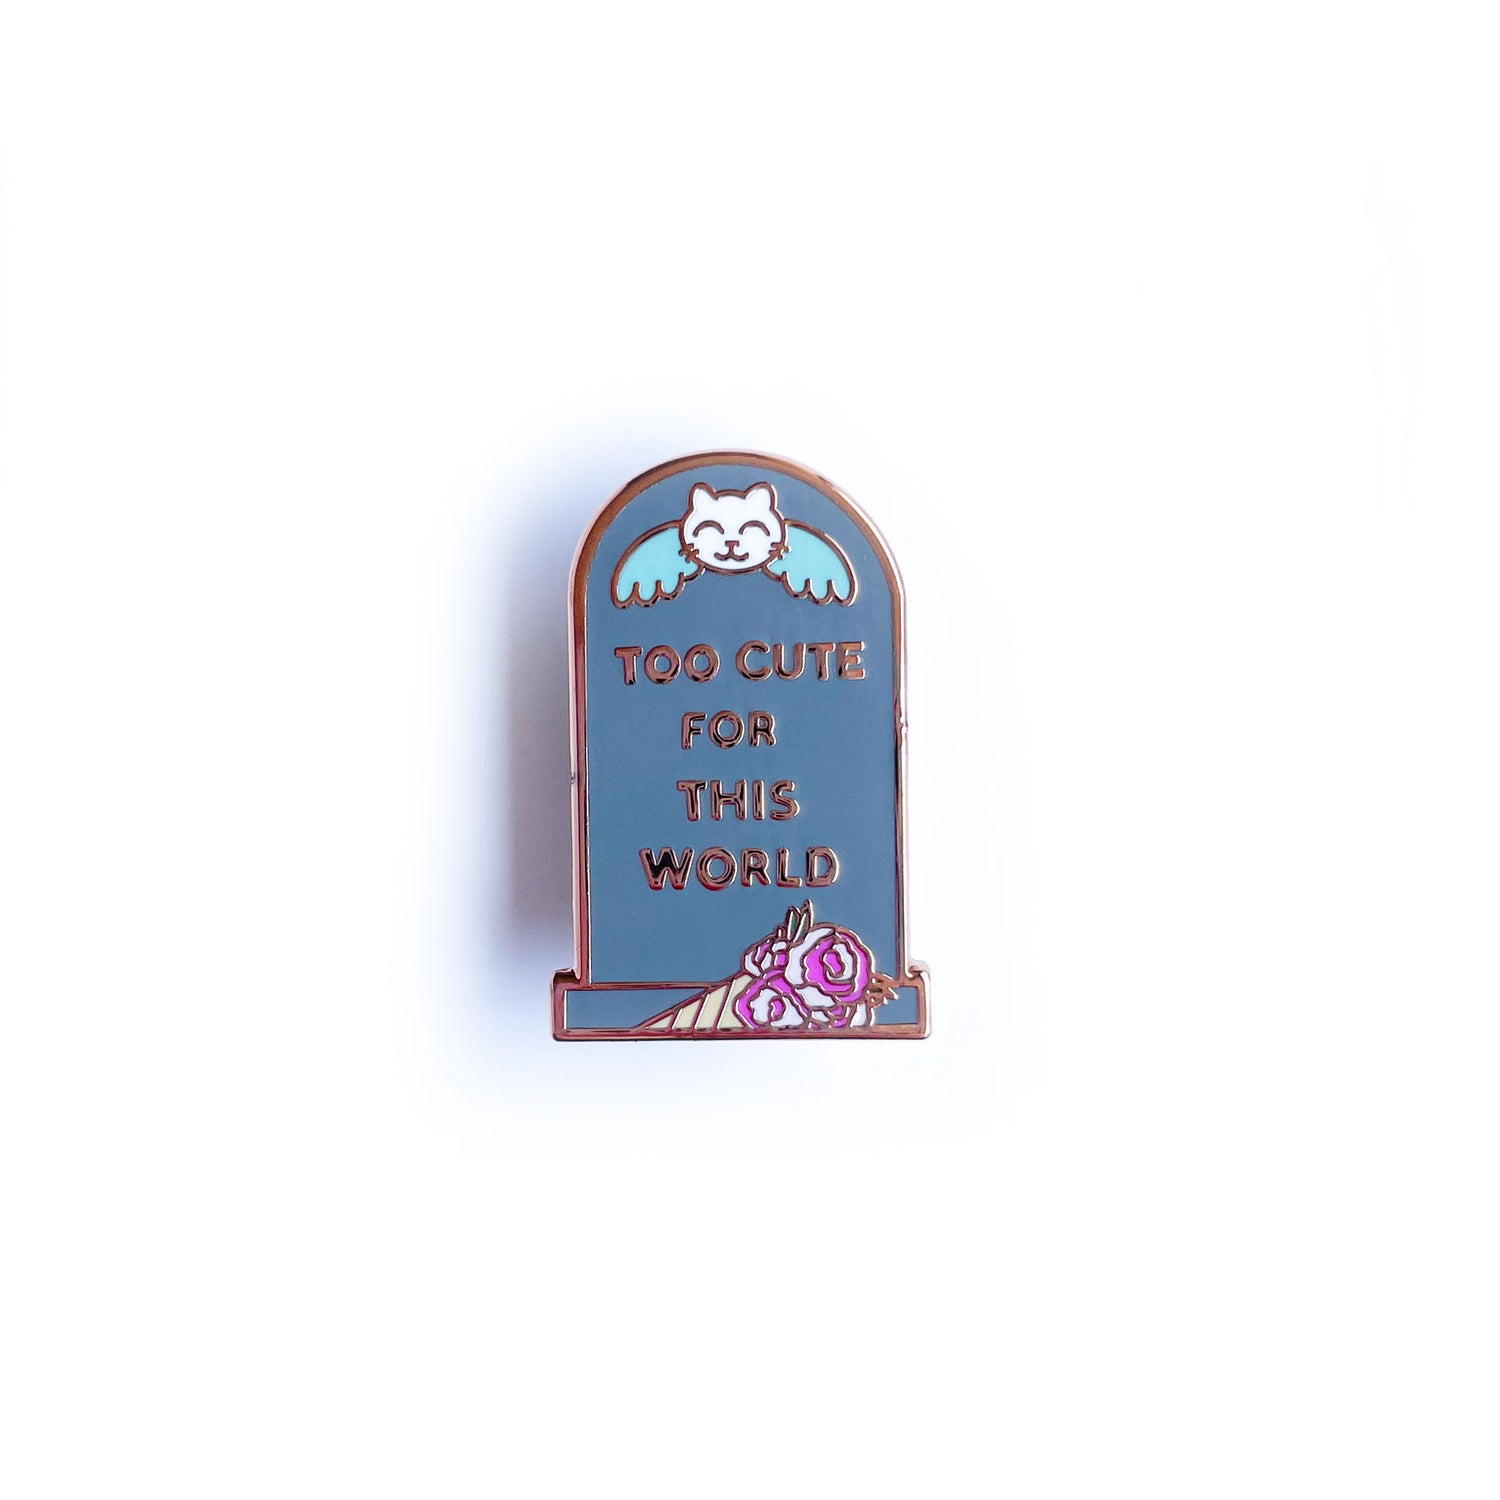 A headstone shaped enamel pin that reads "Too Cute For This World" with a cat angle on it and a bouquet by it.